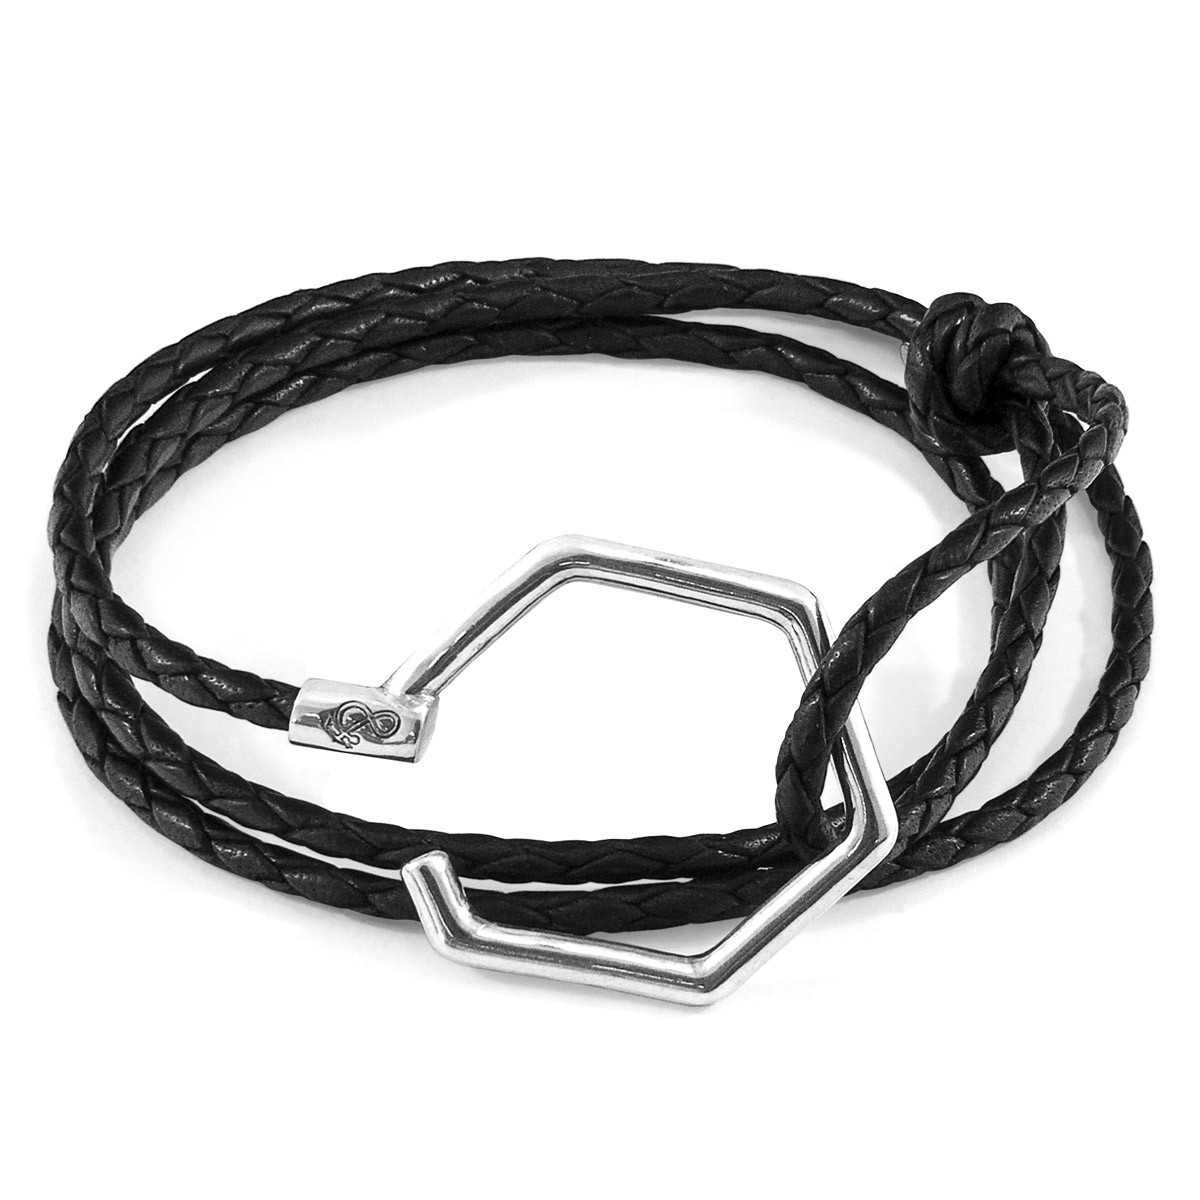 Anchor & Crew Coal Black Storey Silver and Braided Leather Bracelet